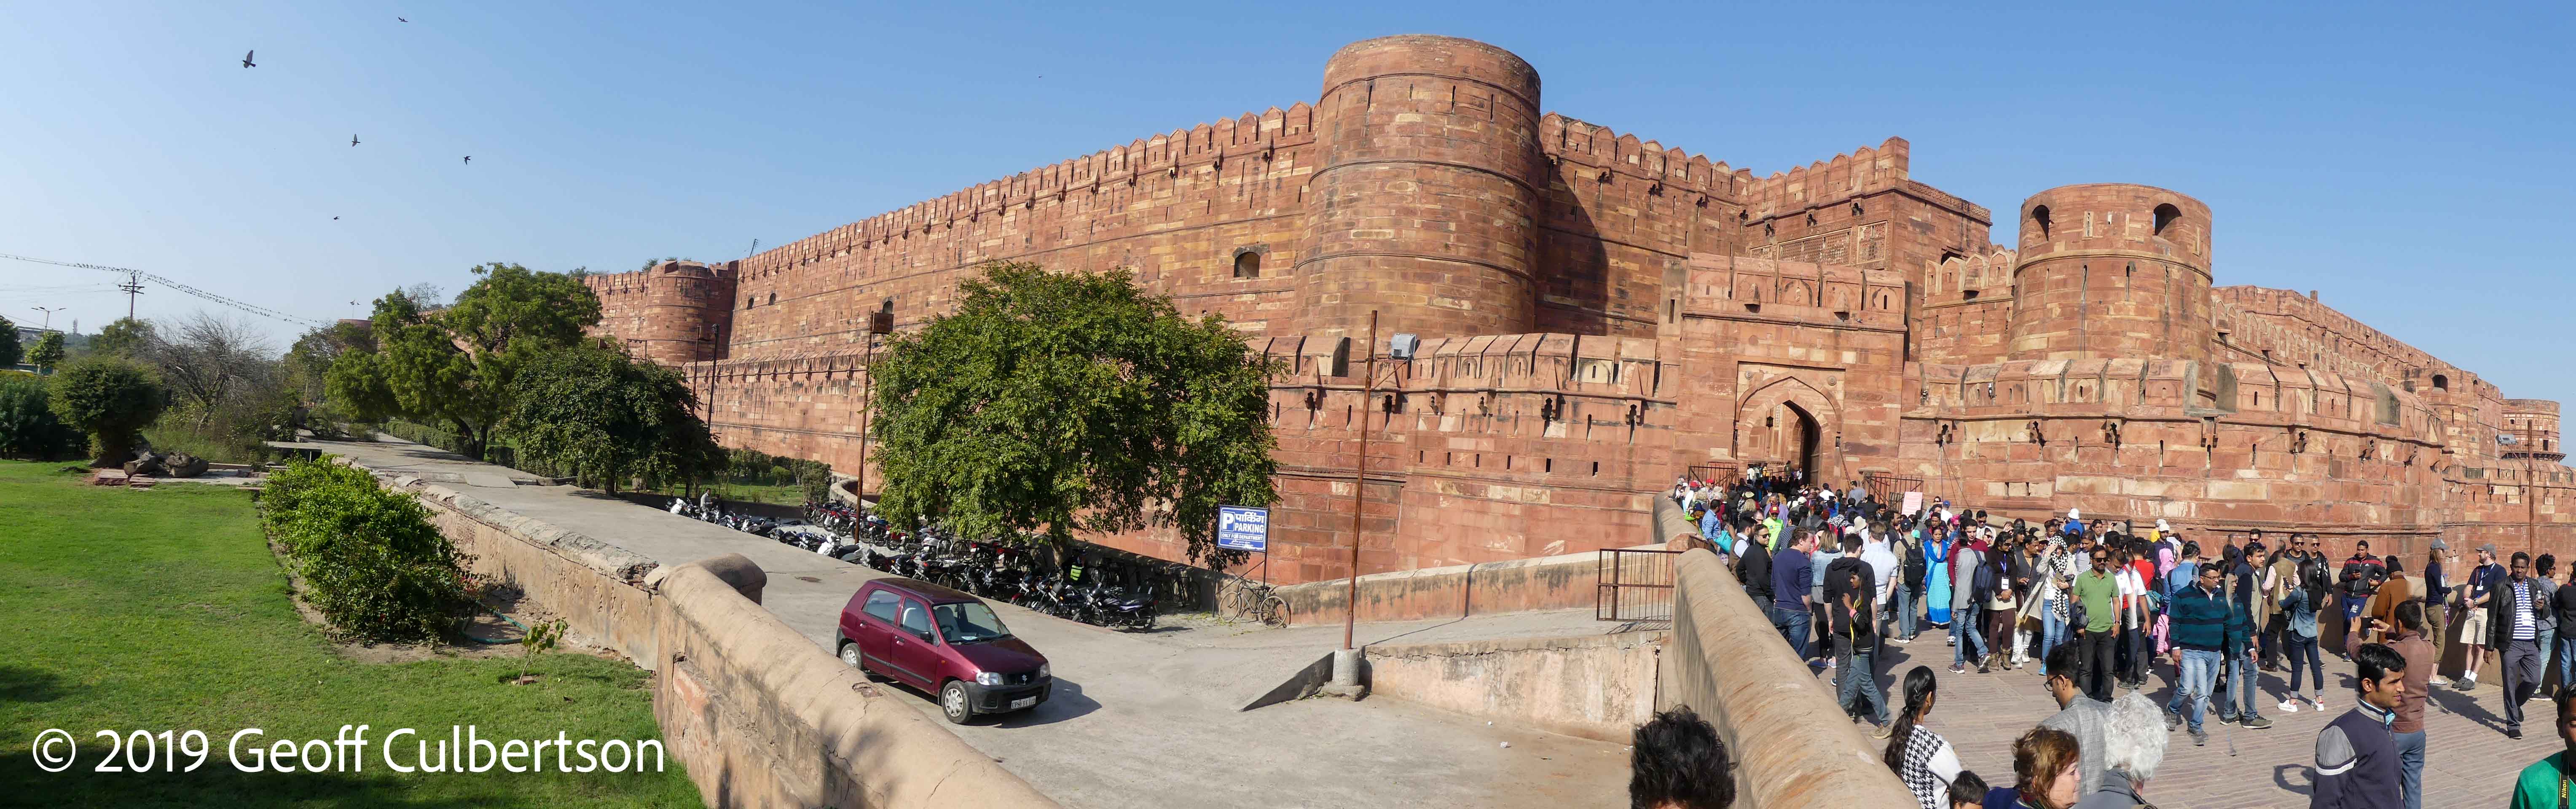 Panorama view of Amar Singh Gate, Agra Fort